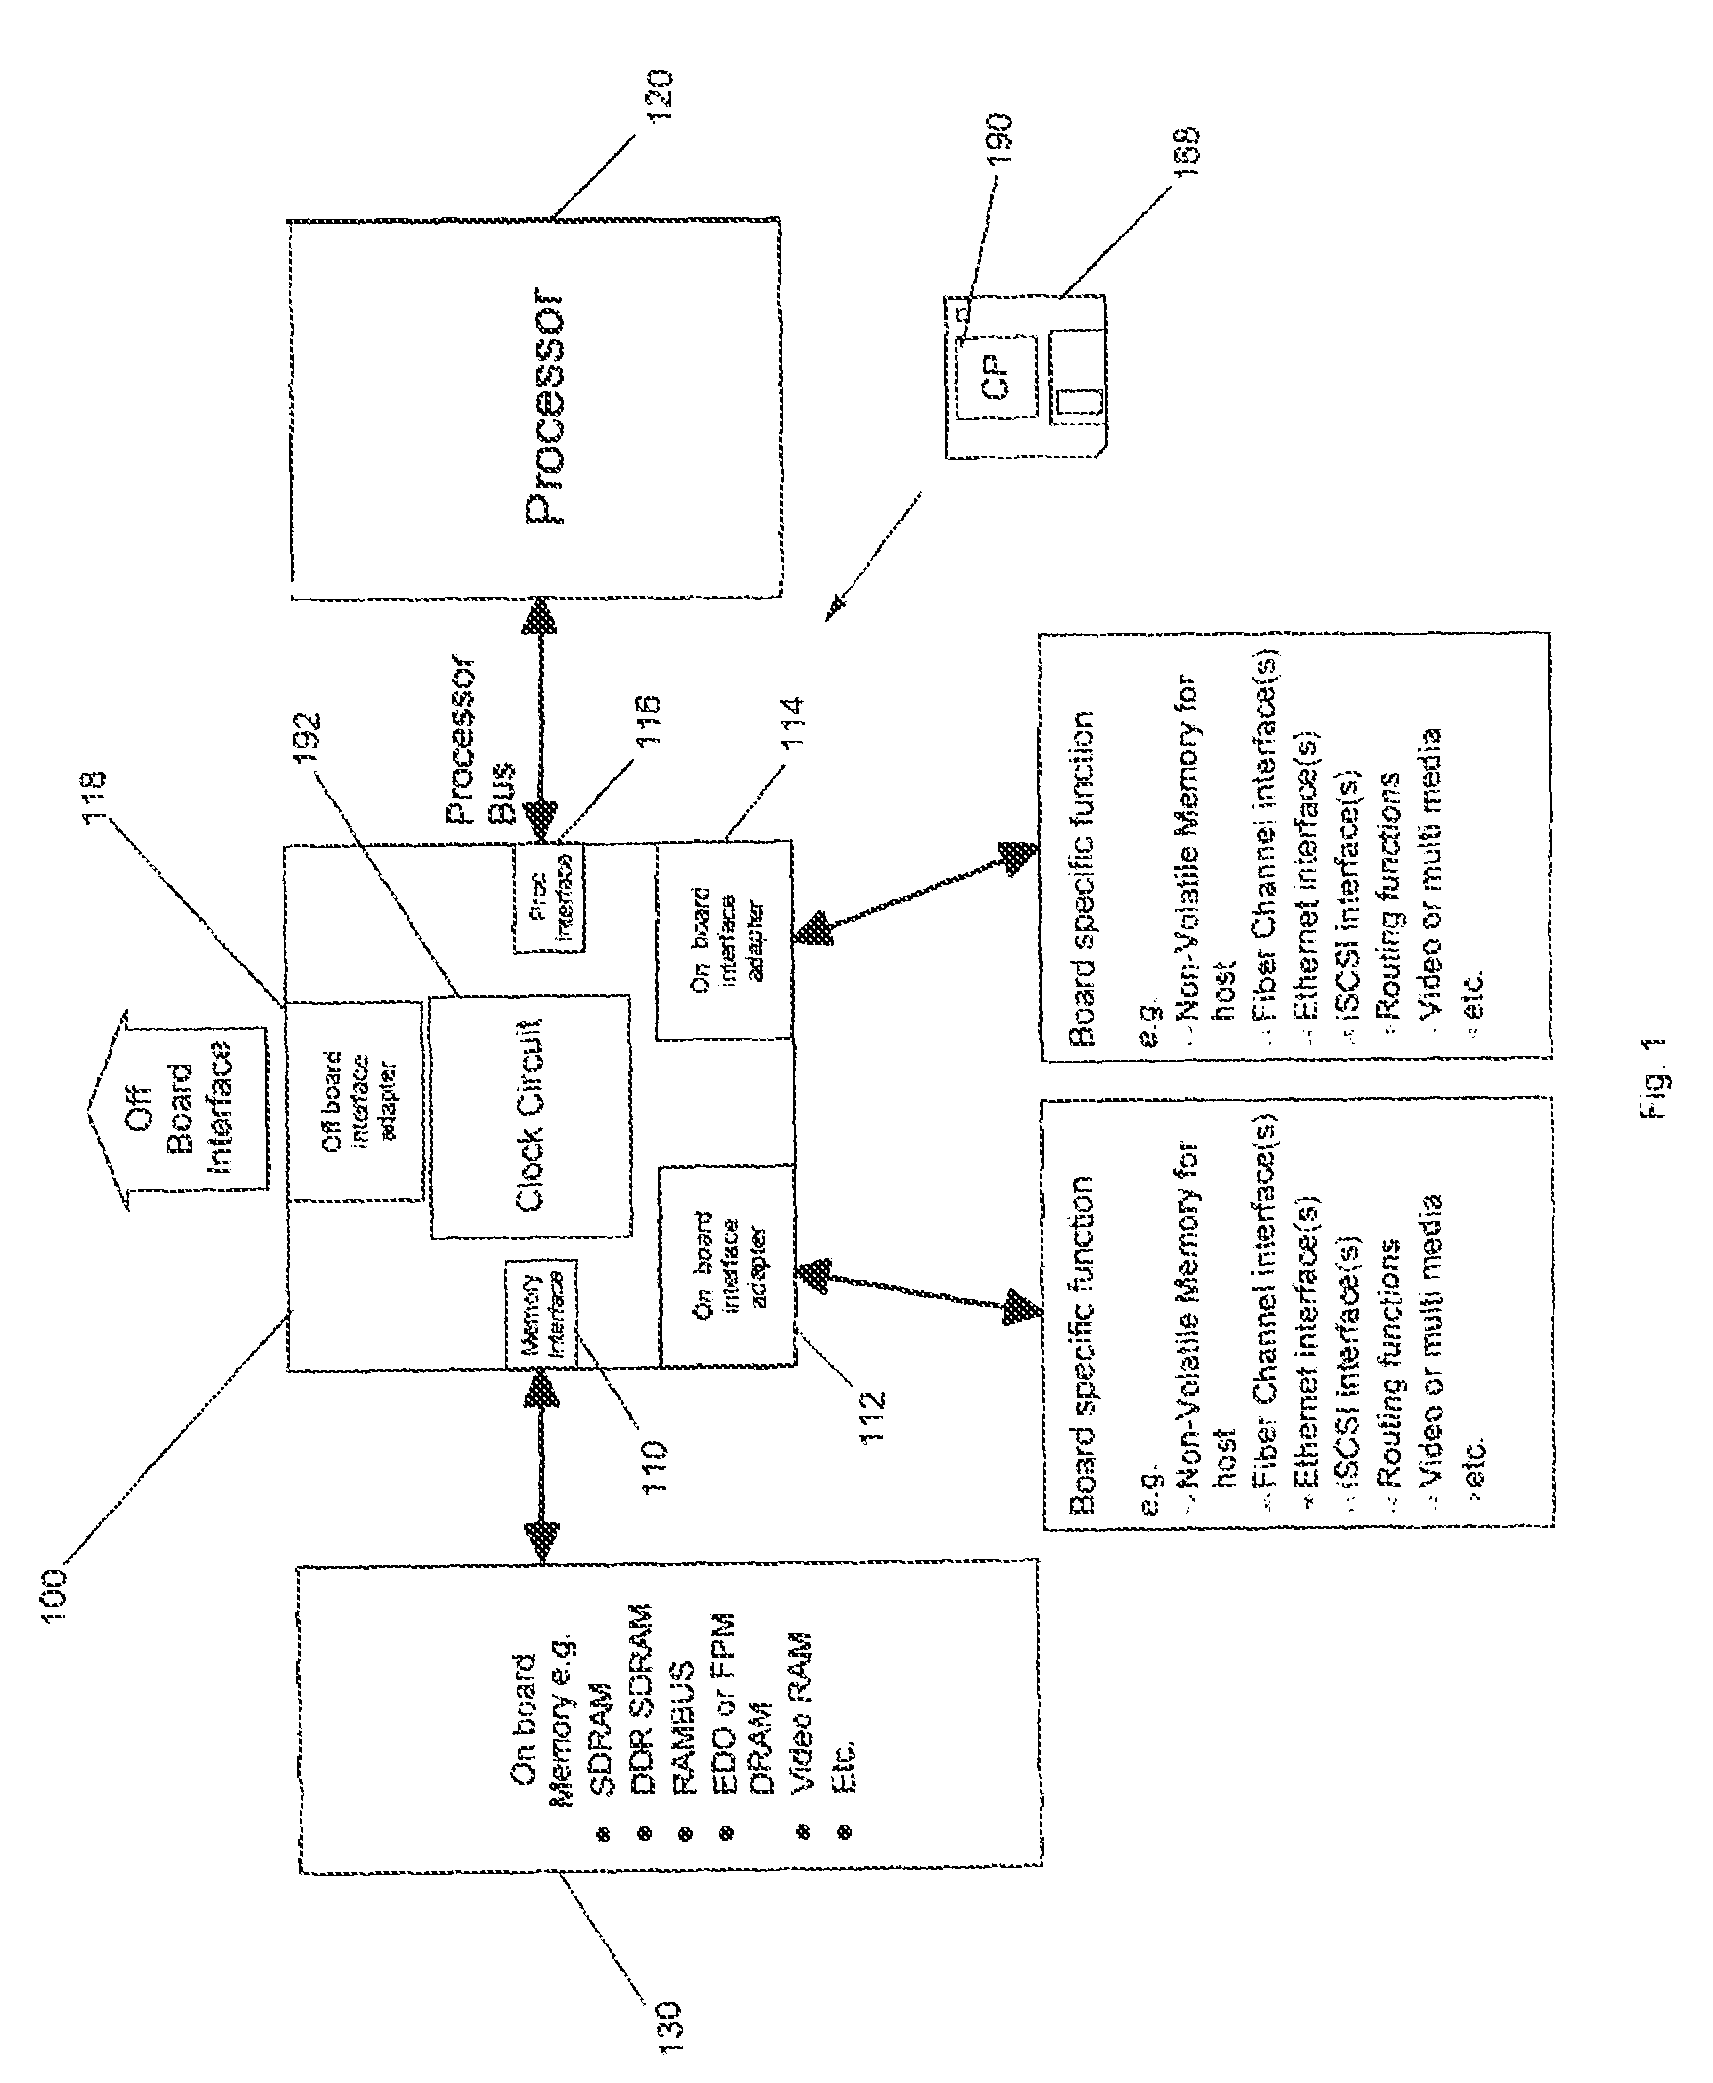 Method, apparatus and program storage device for providing clocks to multiple frequency domains using a single input clock of variable frequency